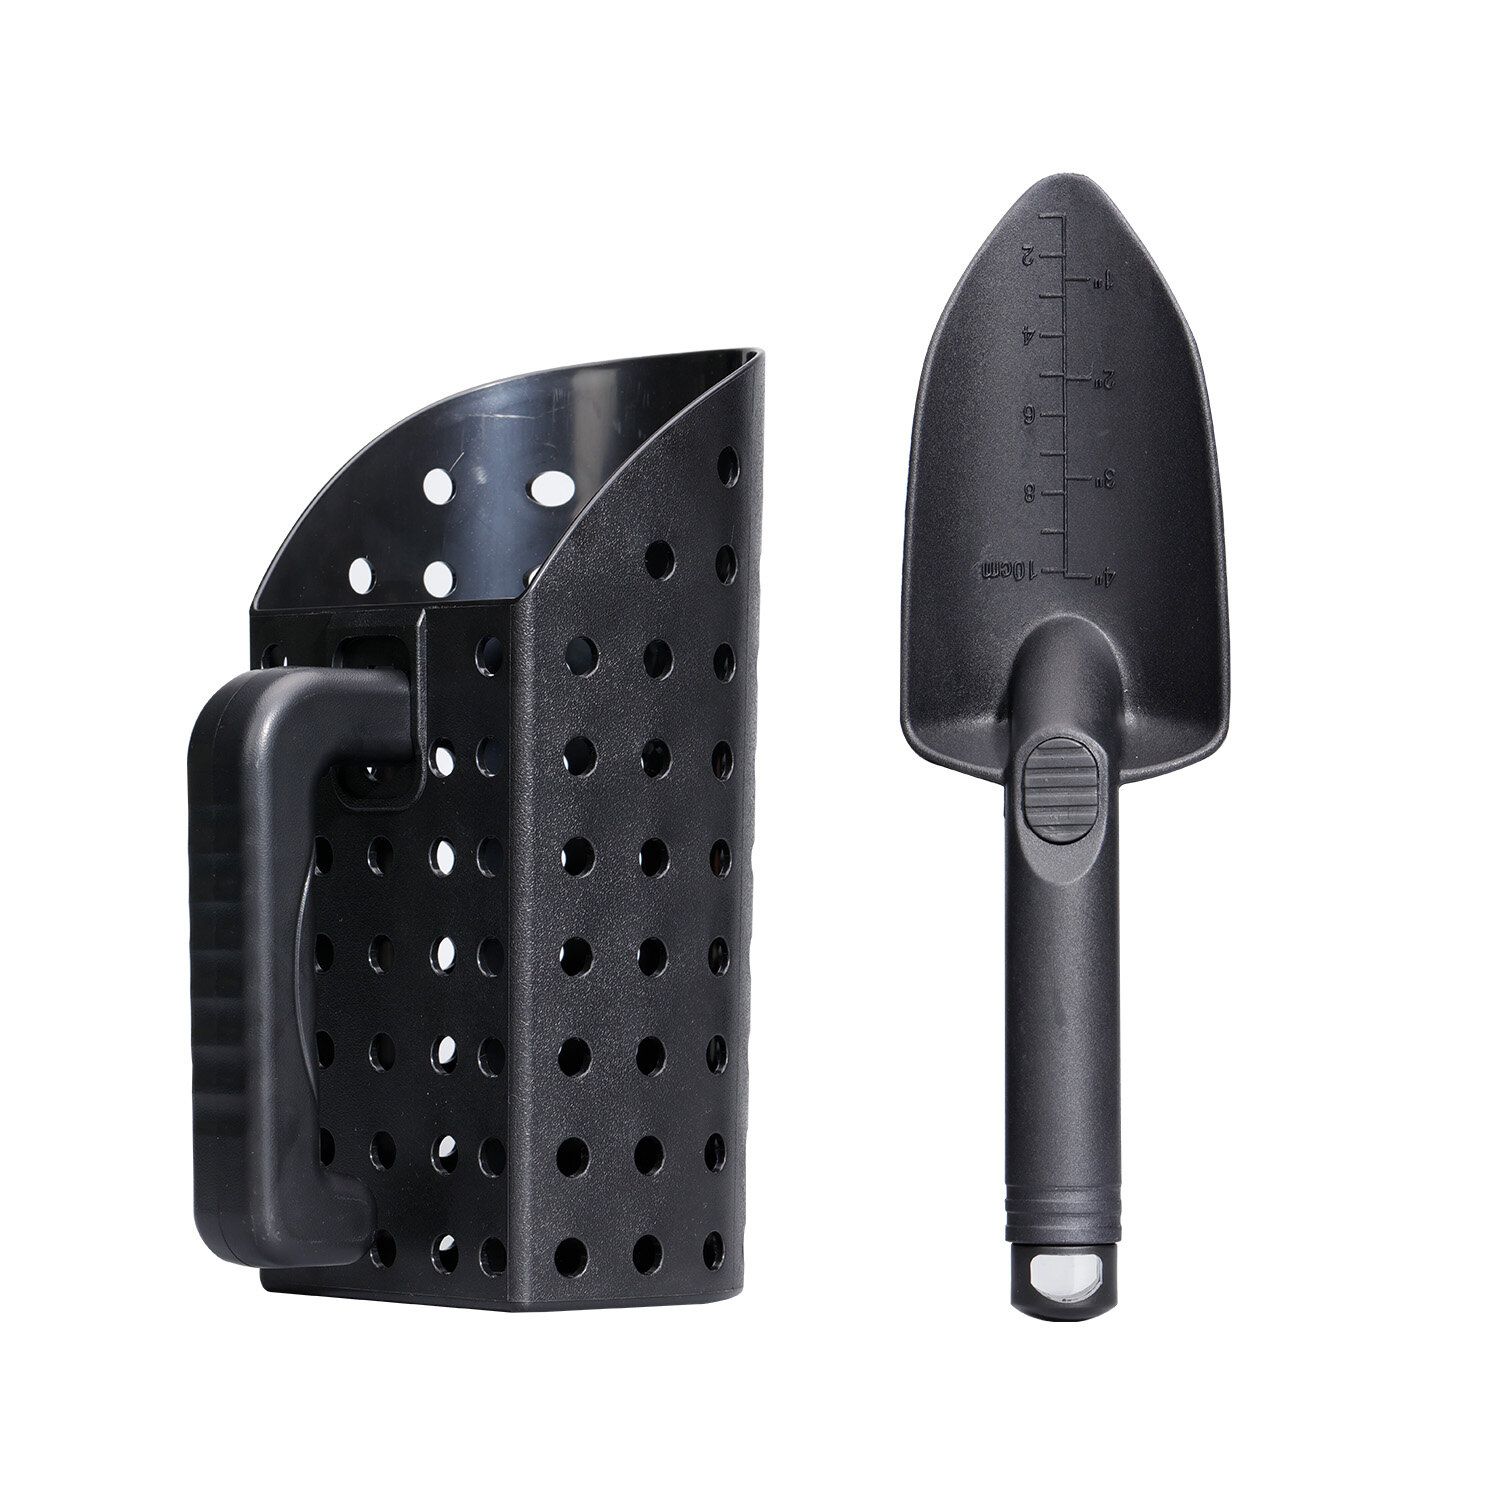 

ABS Sand Scoop and Shovel Accessories for Metal Detecting and Treasure Hunting